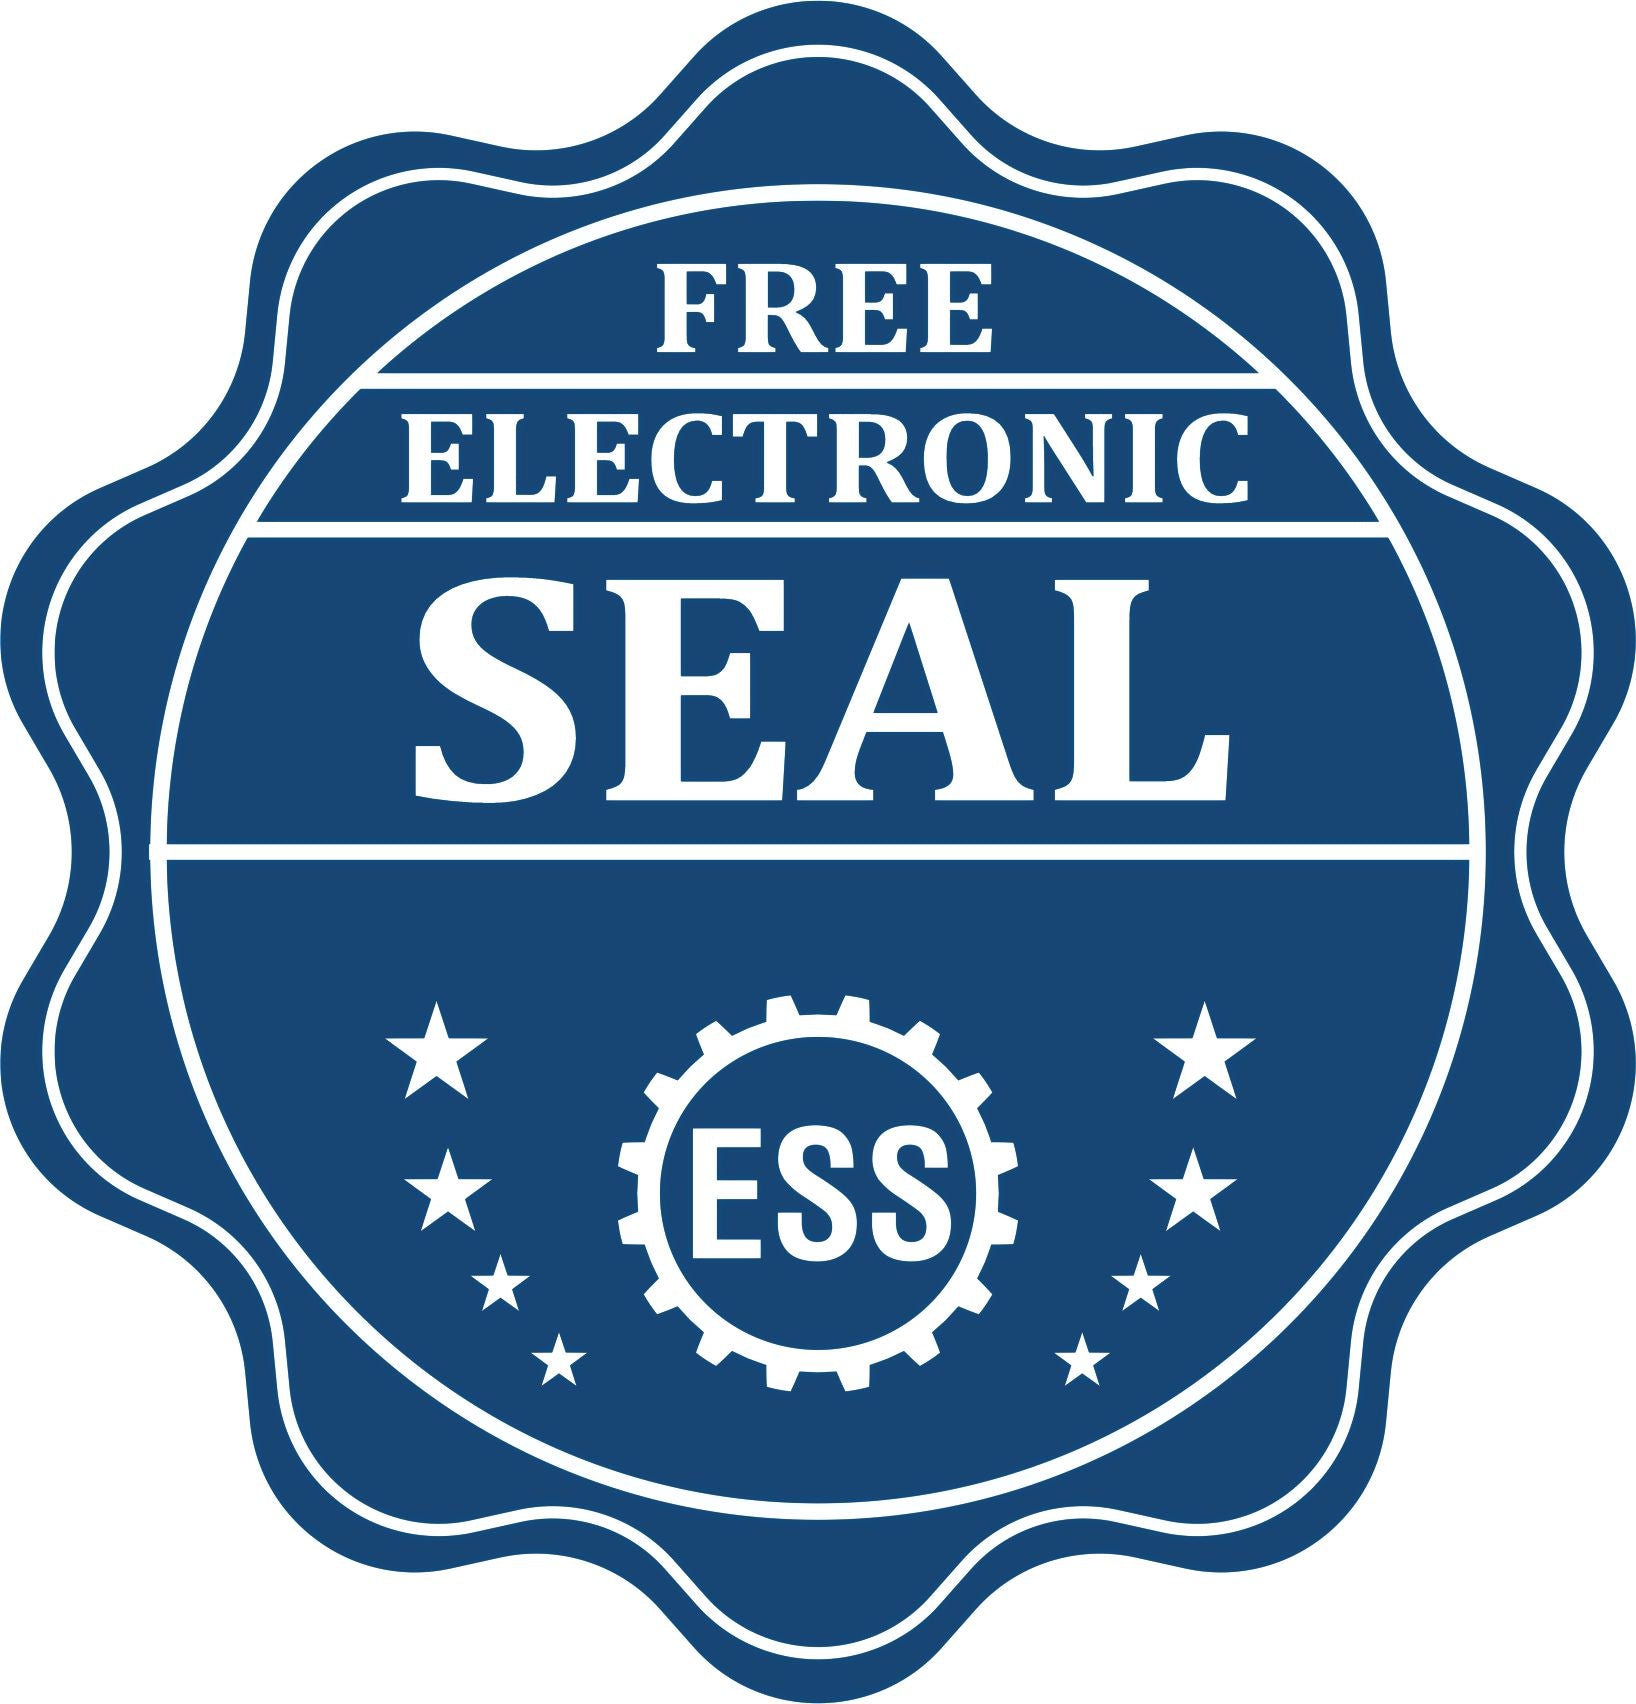 A badge showing a free electronic seal for the Gift Kentucky Architect Seal with stars and the ESS gear on the emblem.